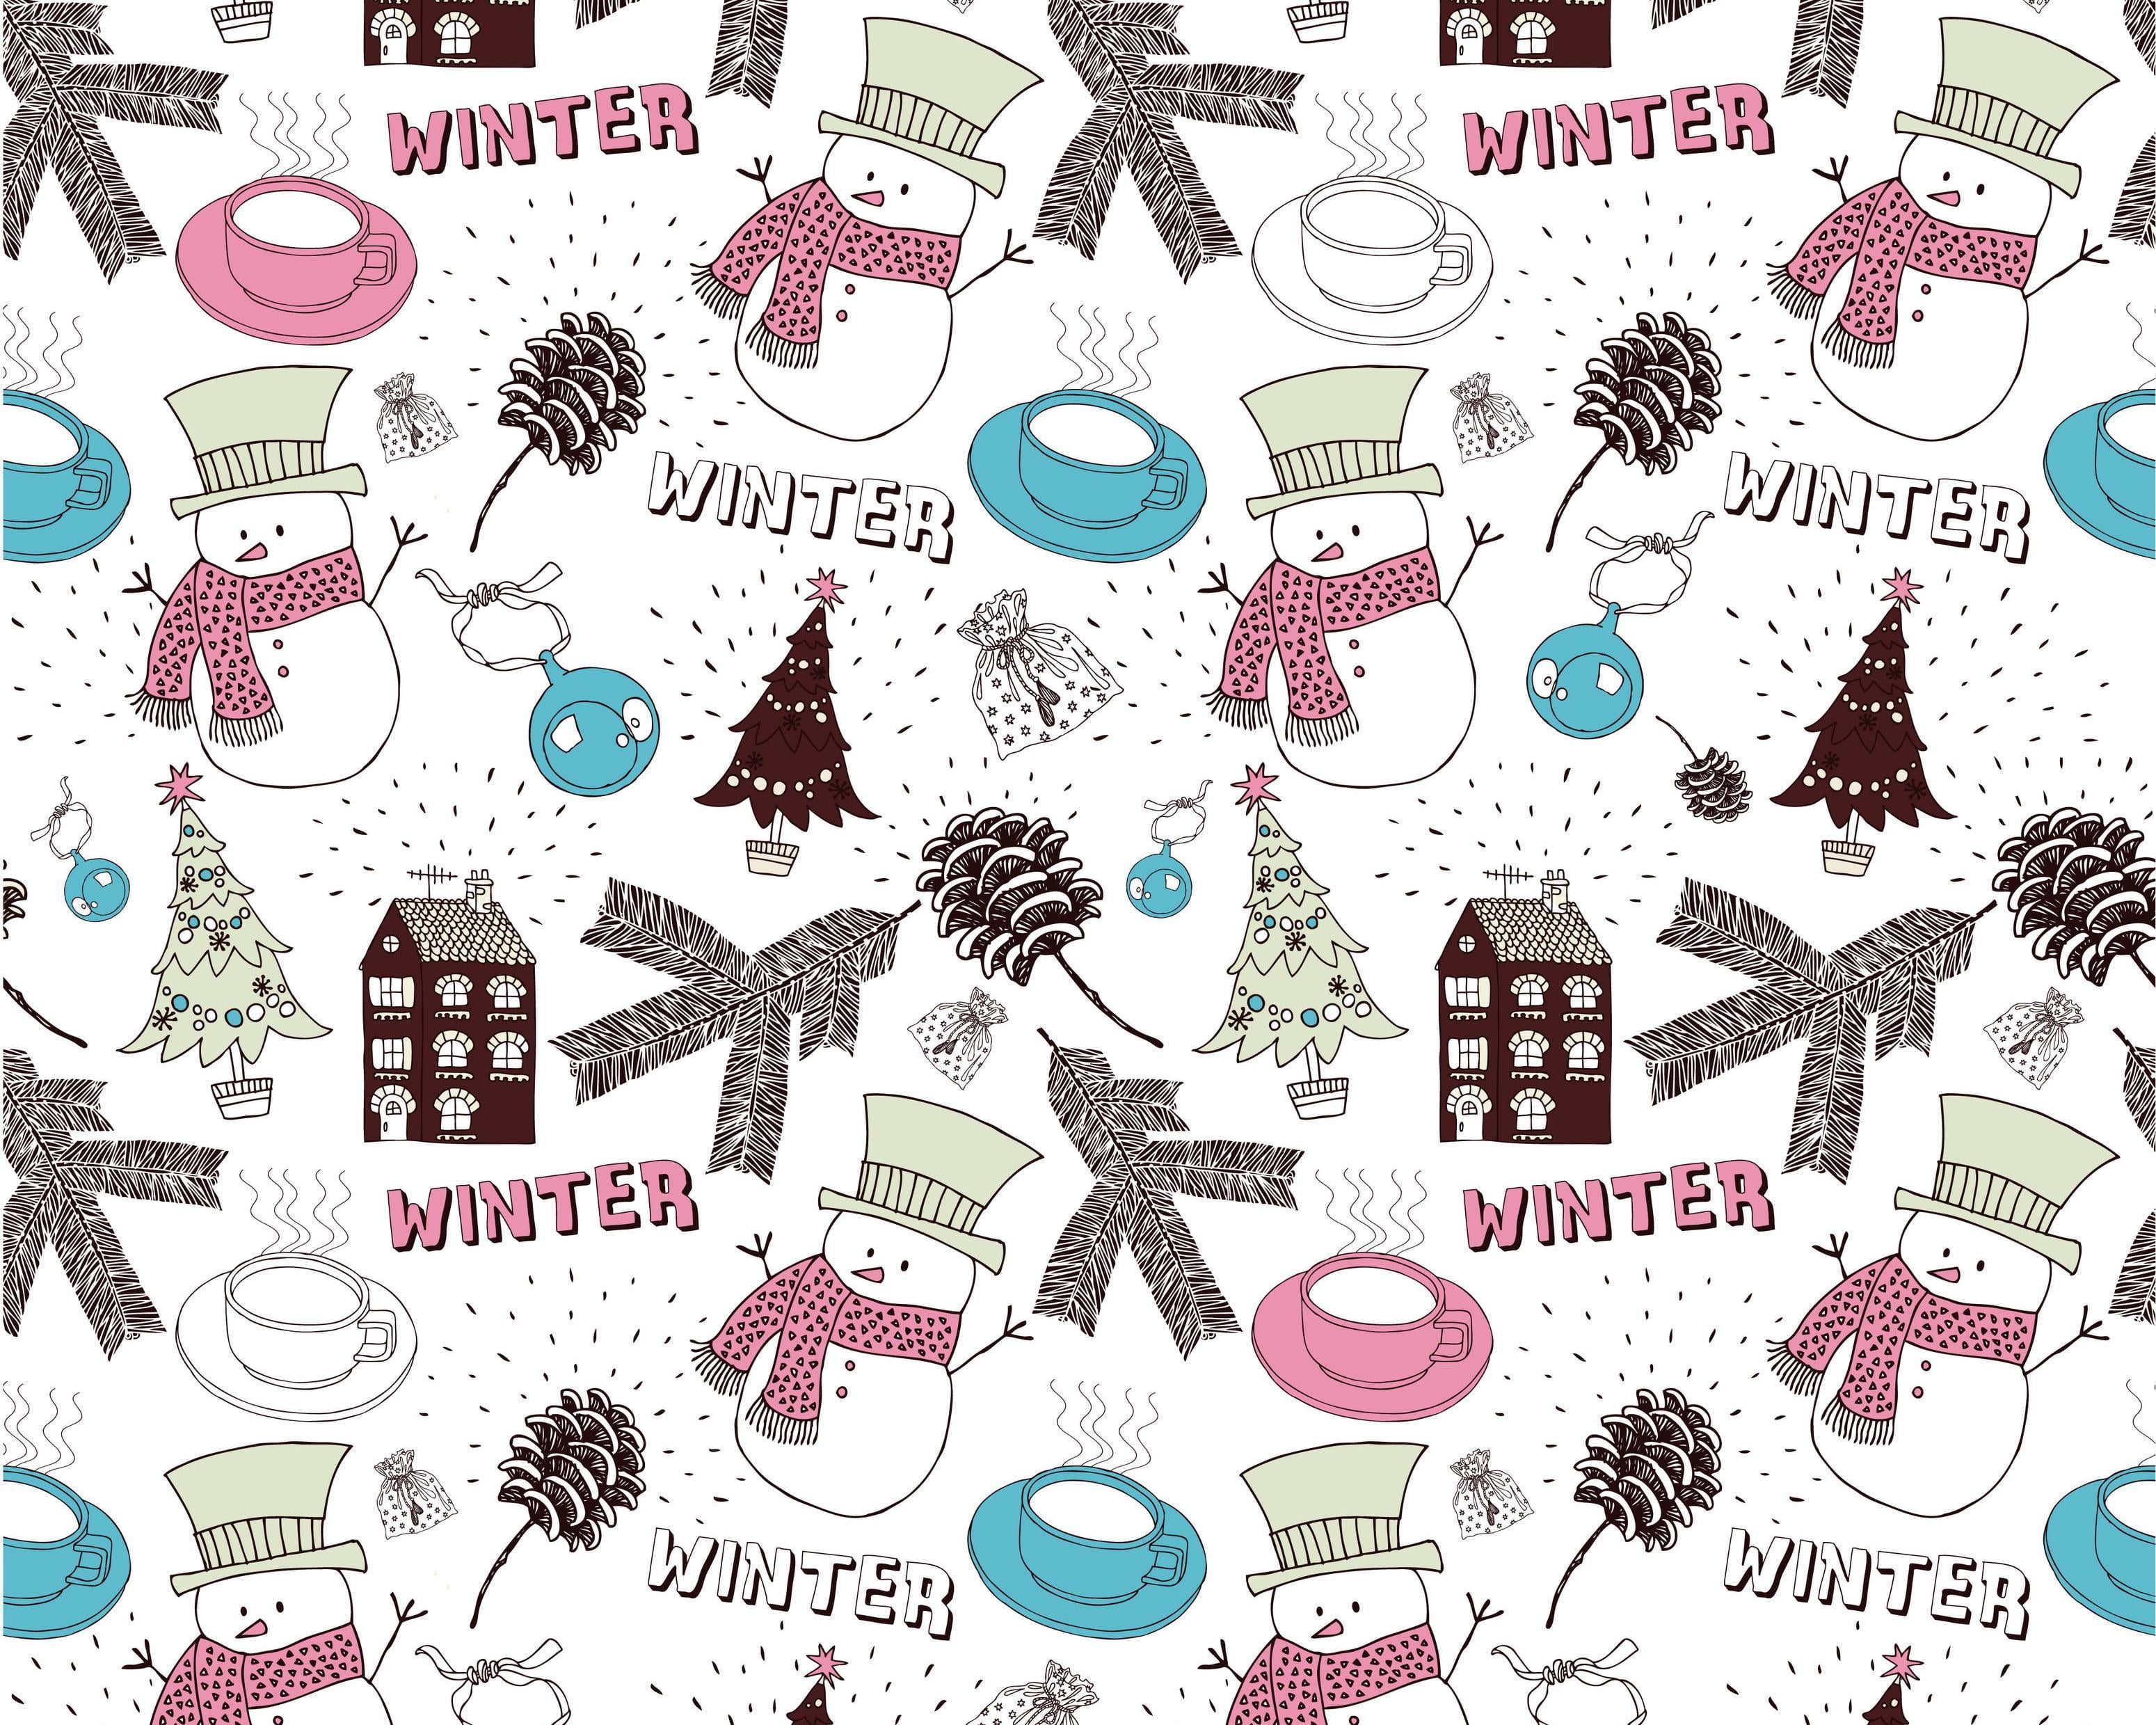 Christmas themed collage wallpaper, winter, house, new year, ball